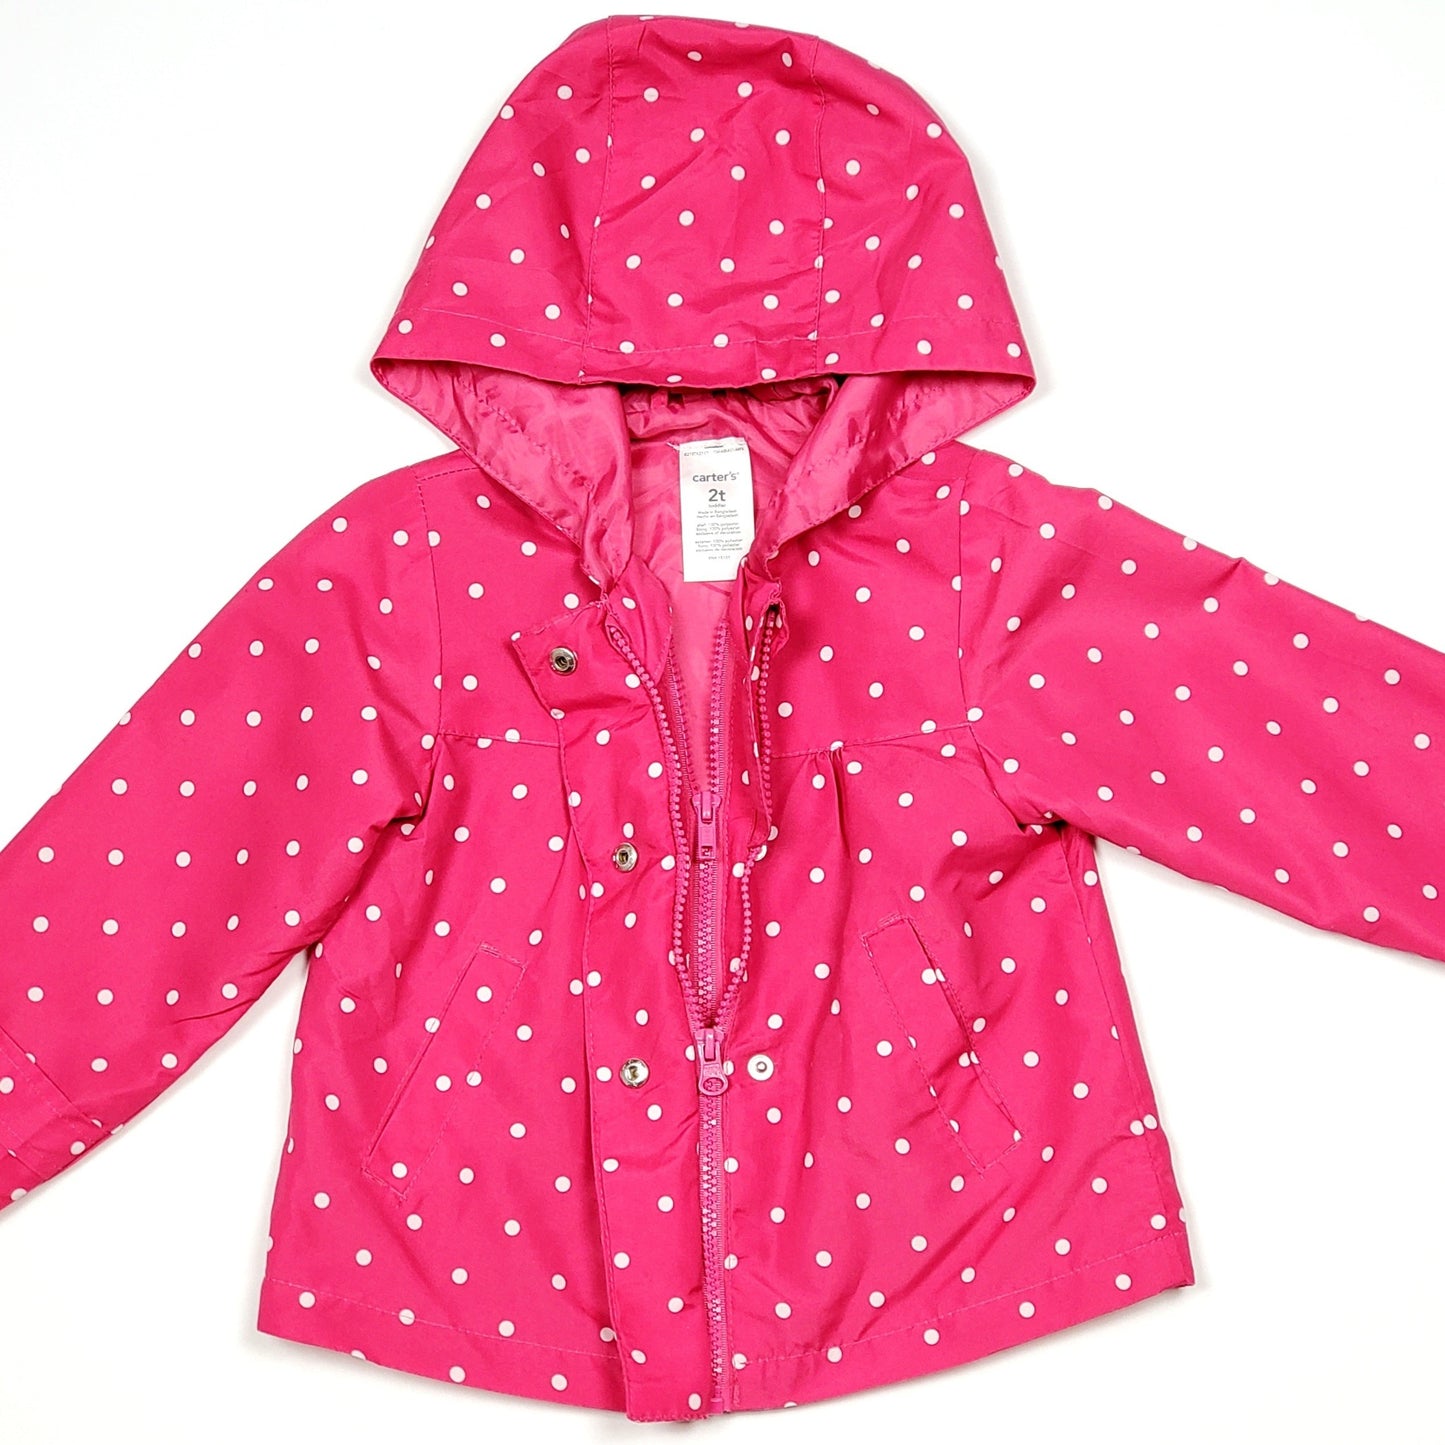 Carters Pink White Polka Dot Girls Jacket 2T Used View 2